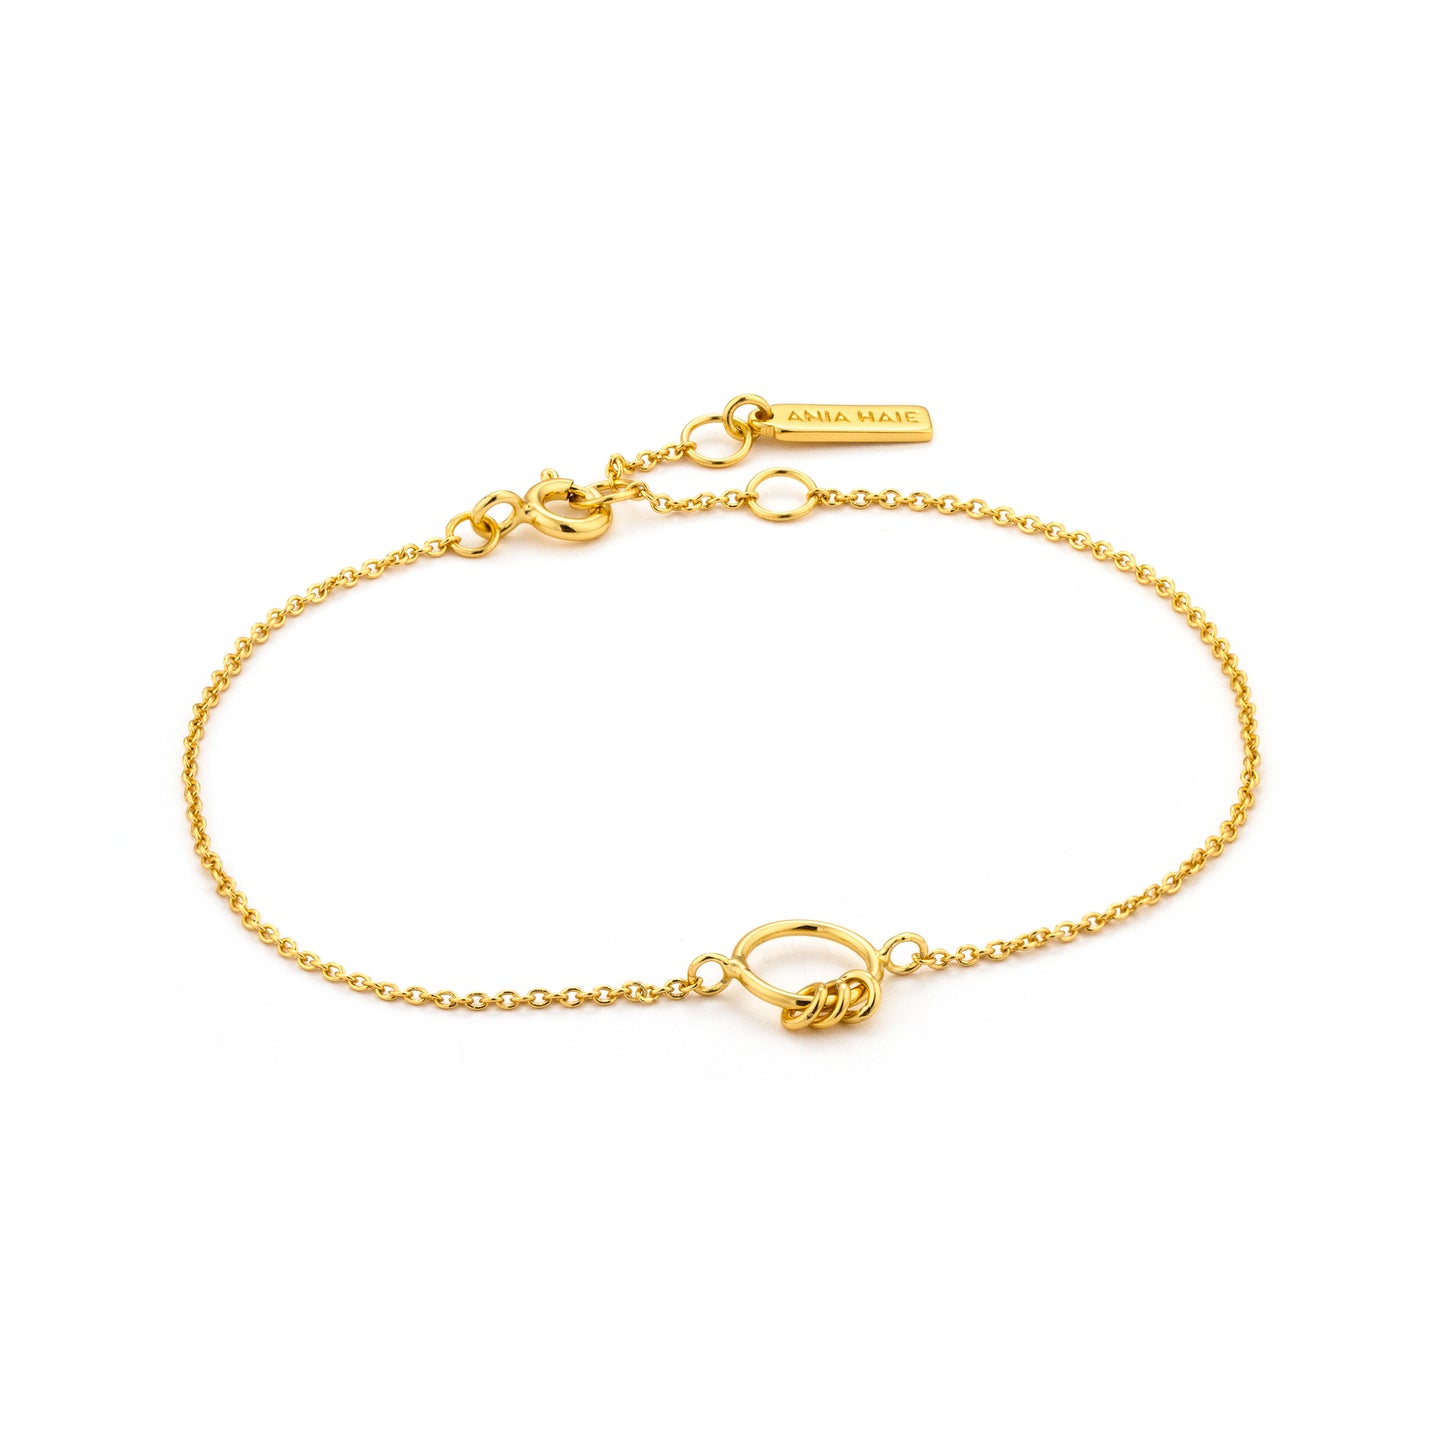 ANIA HAIE ANIA HAIE - Gold Modern Circle Bracelet available at The Good Life Boutique